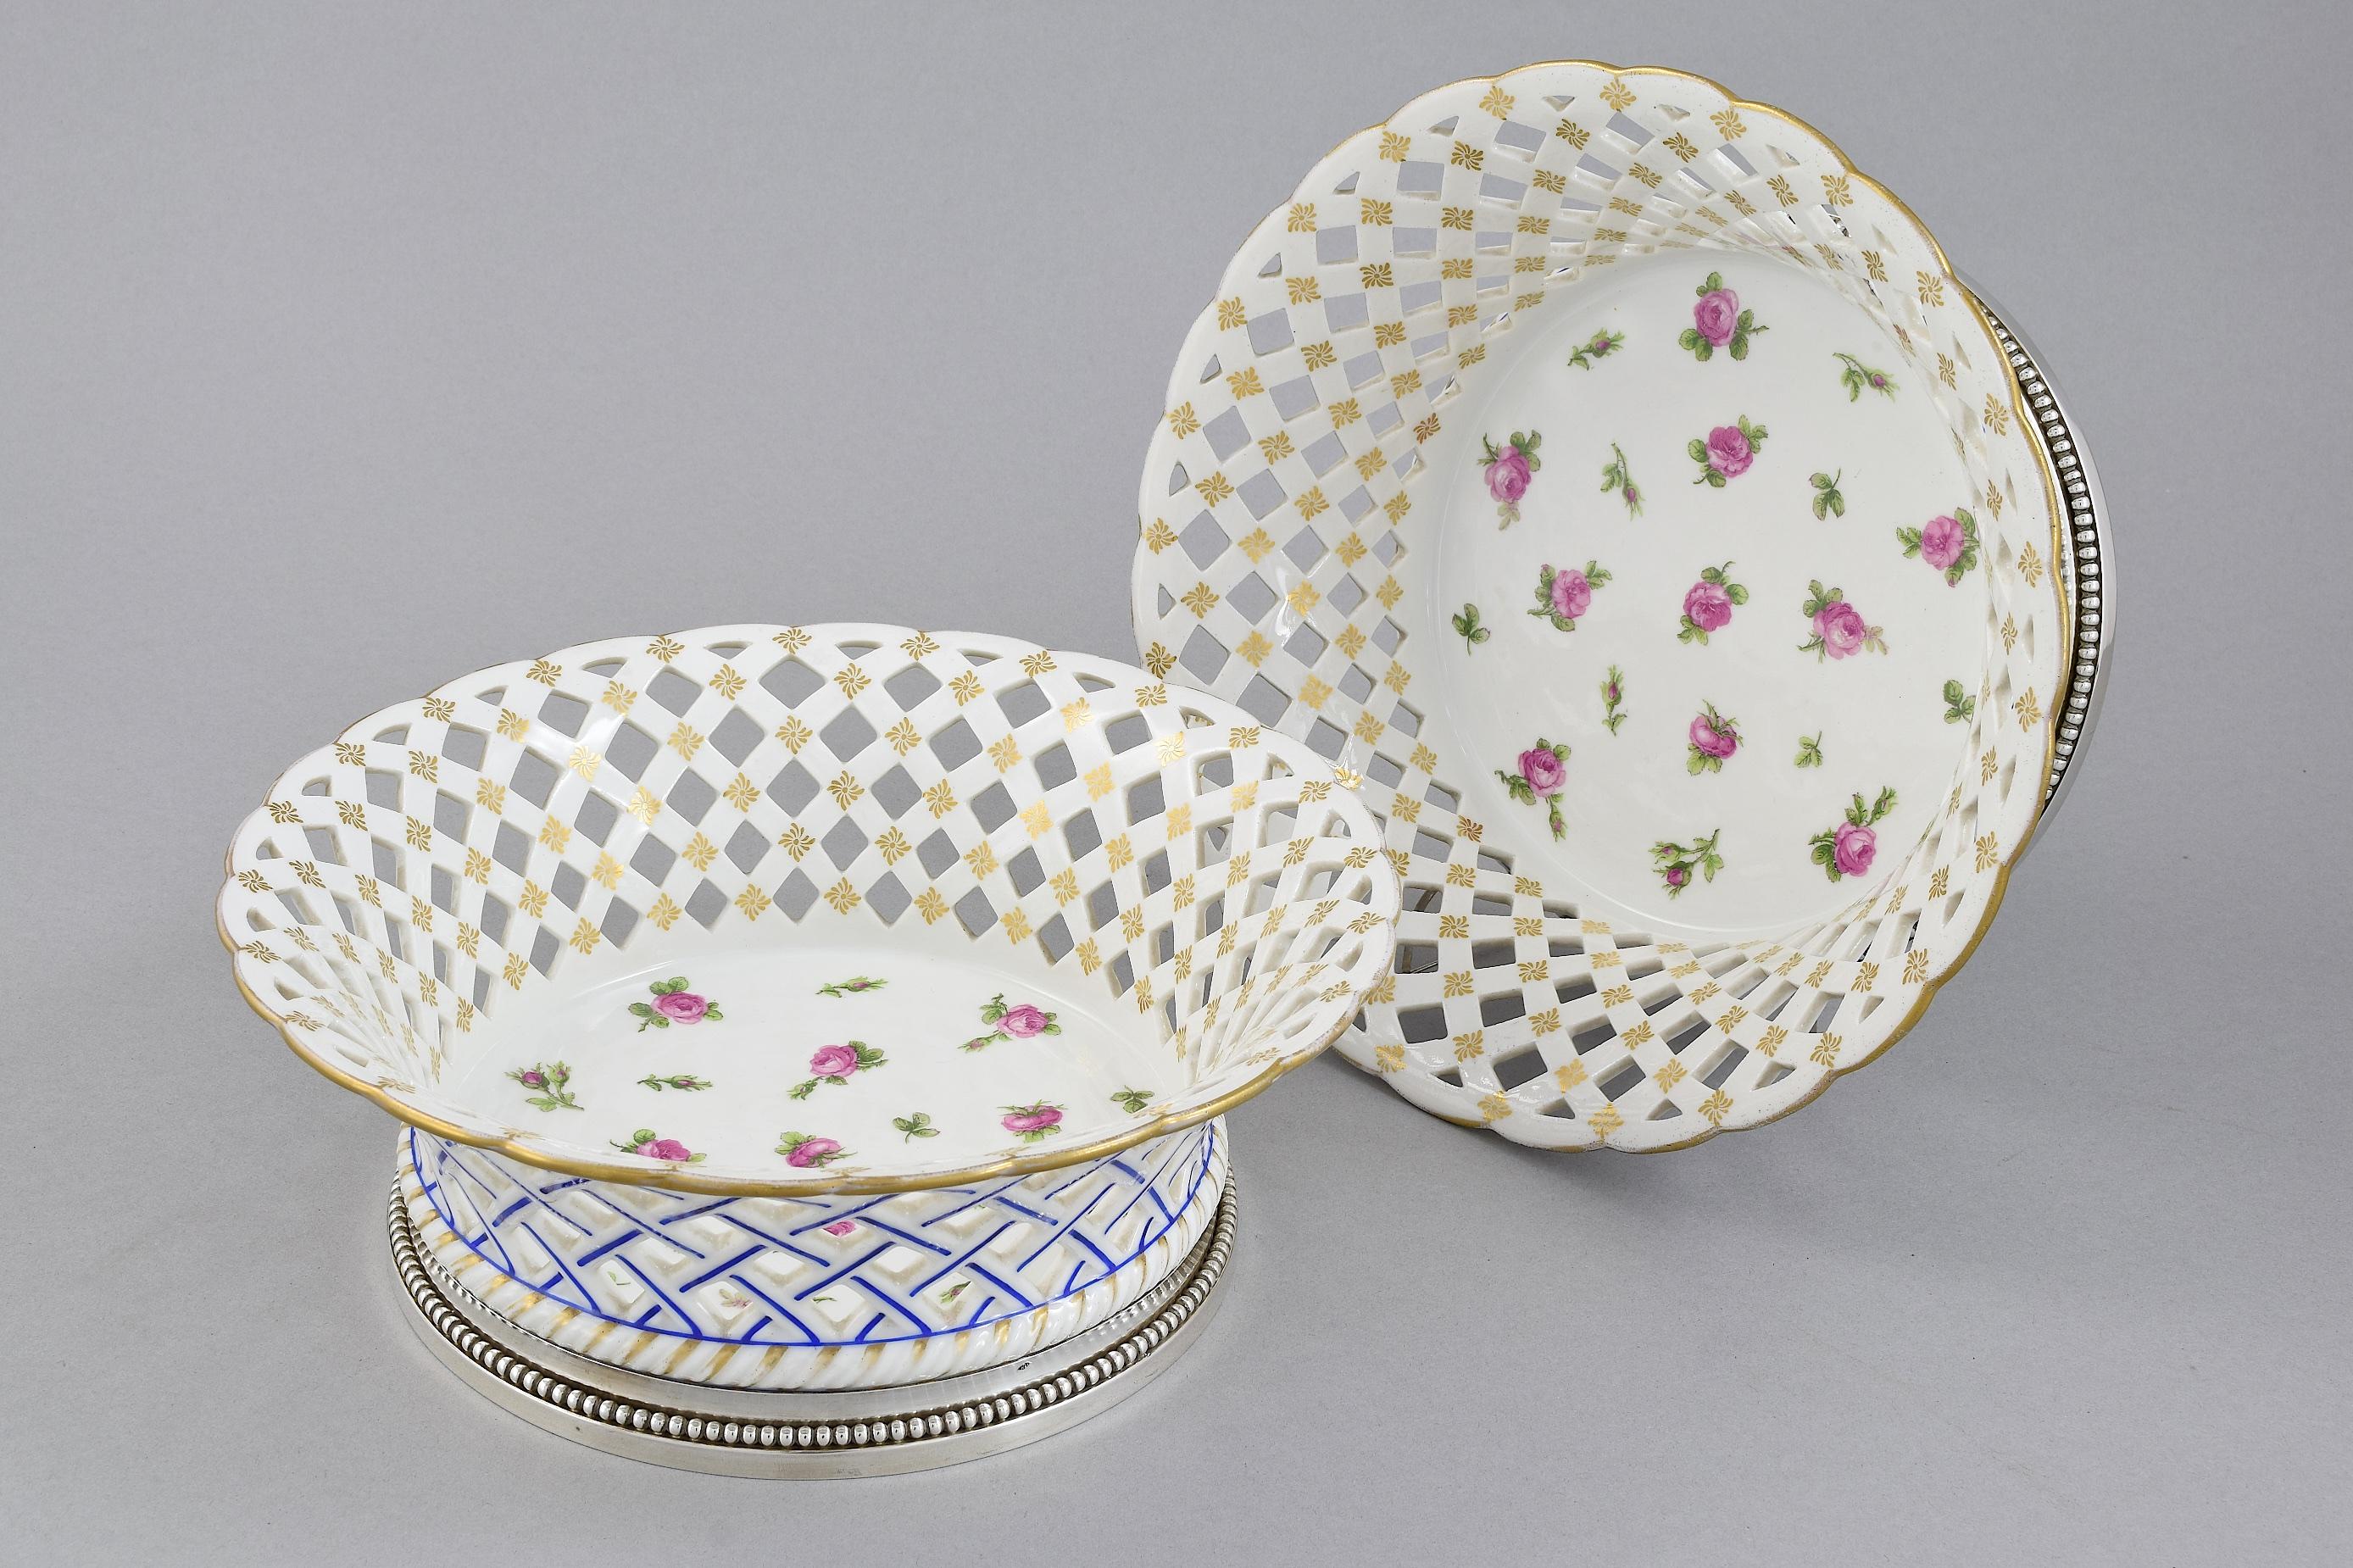 A pretty pair of silver gilt mounted porcelain baskets. French 1st standard (0.950). Makers mark for 'E.P' on the base which is likely for Emile Puiforcat. The pierced open work sides are intricately painted with flowers and gold trims.